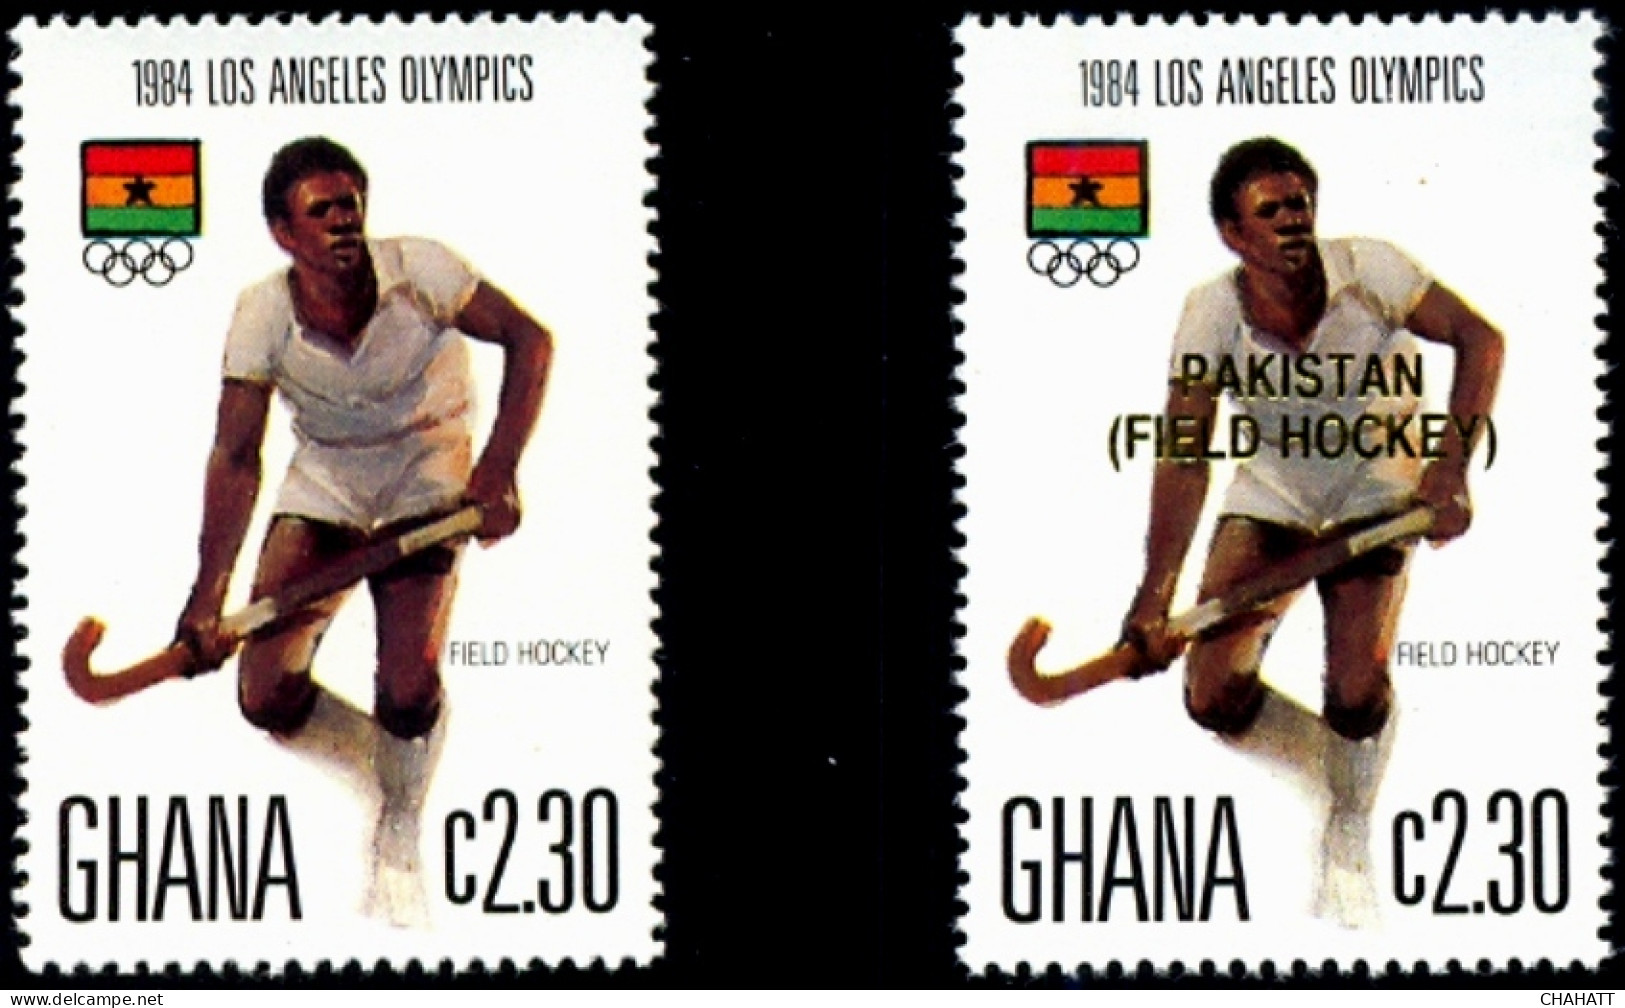 SUMMER OLYMPICS-1984-FIELD HOCKEY-NORMAL STAMP WITH AN OVERPRINT IN GOLD -GHANA-MNH-A5-86 - Rasenhockey